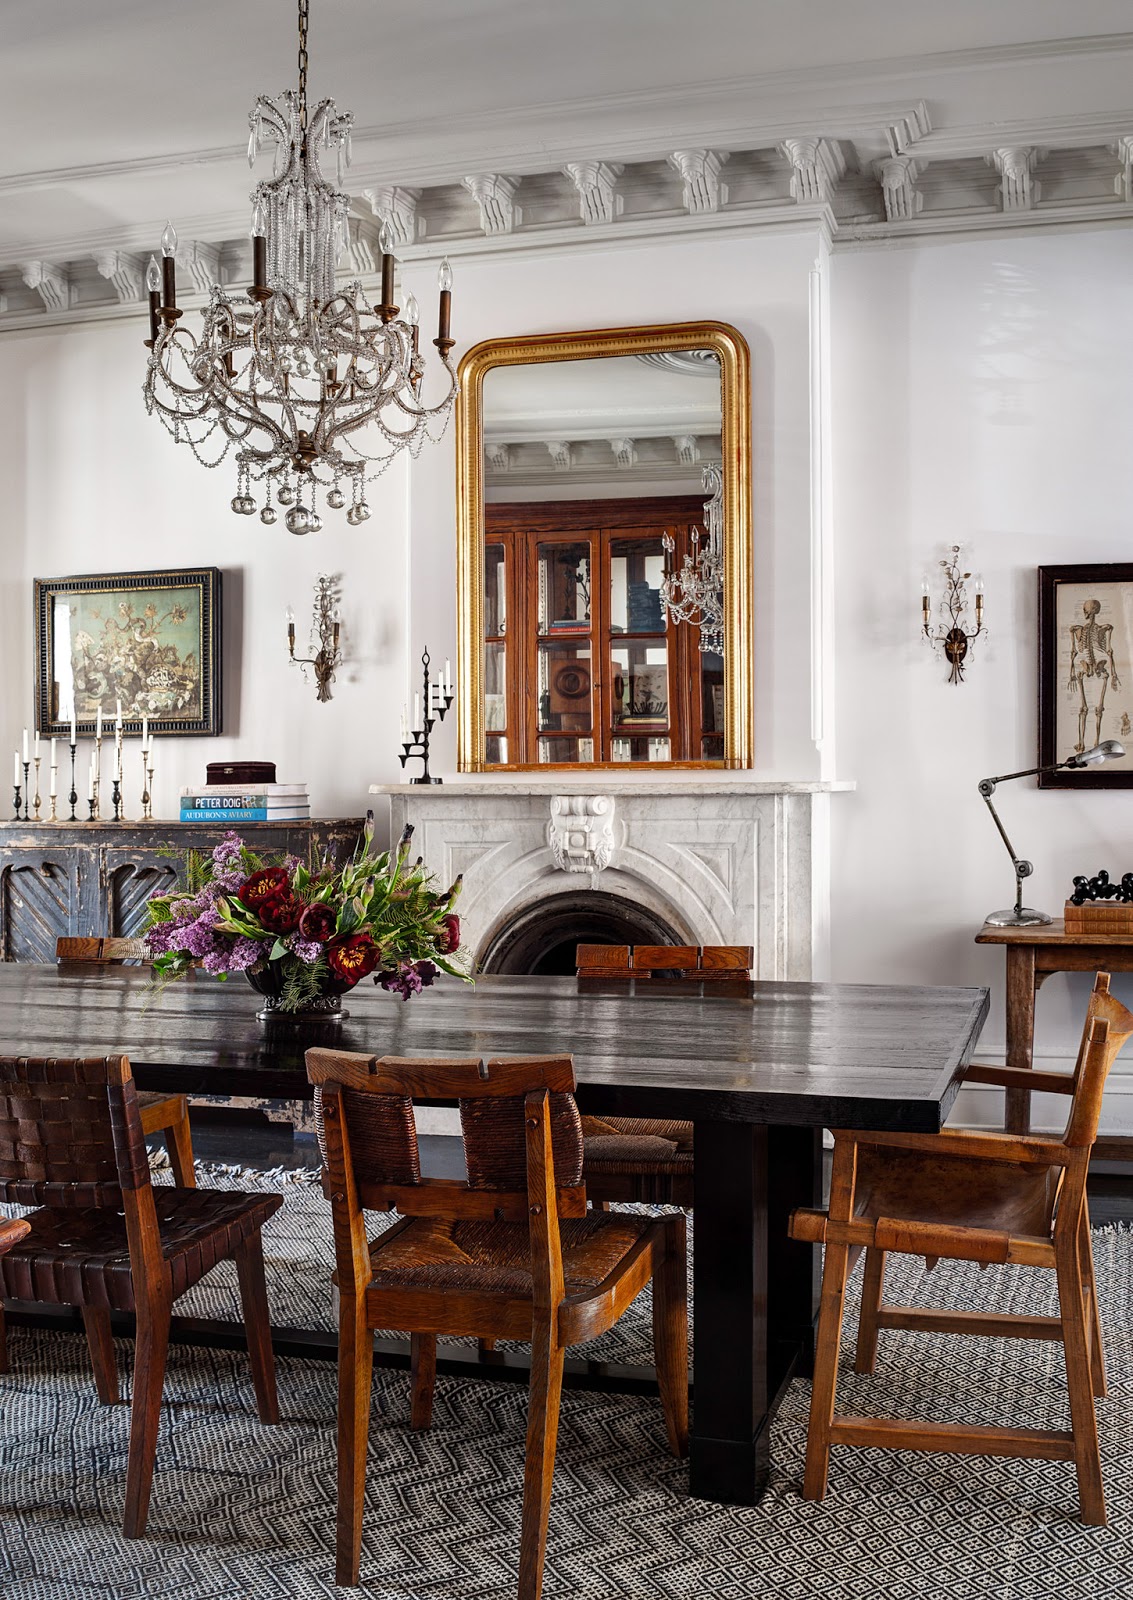 brooklyn-brownstone-great-homes-fireplaces-dining-room